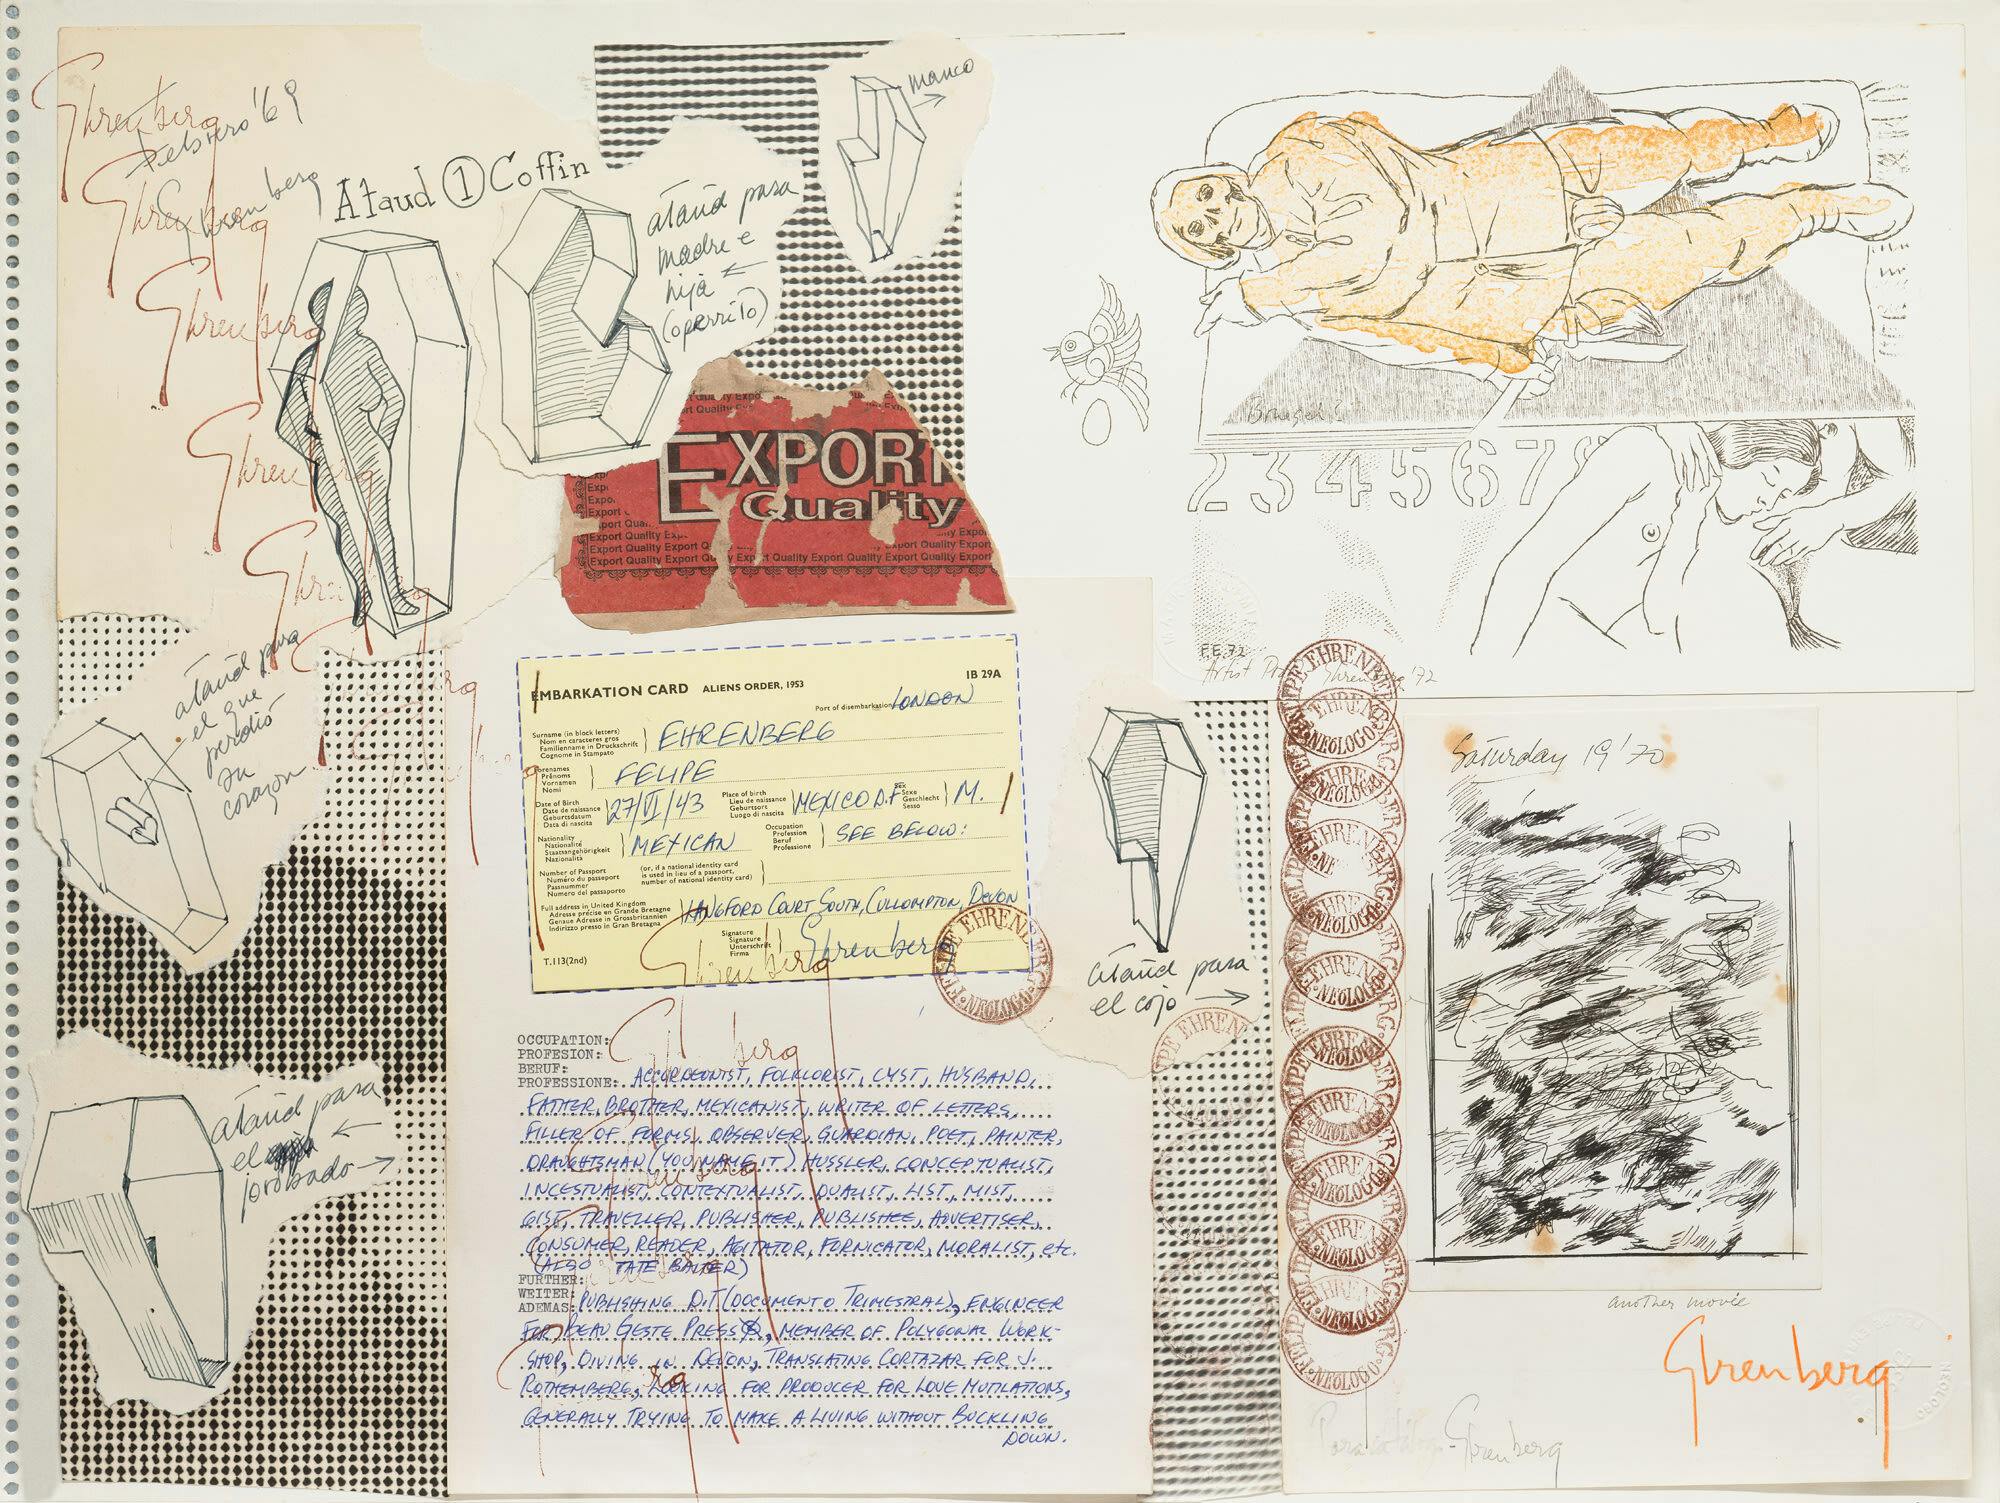 A collage showing fragments of official documents and drawings, overlaid with handwritten text and stamps.